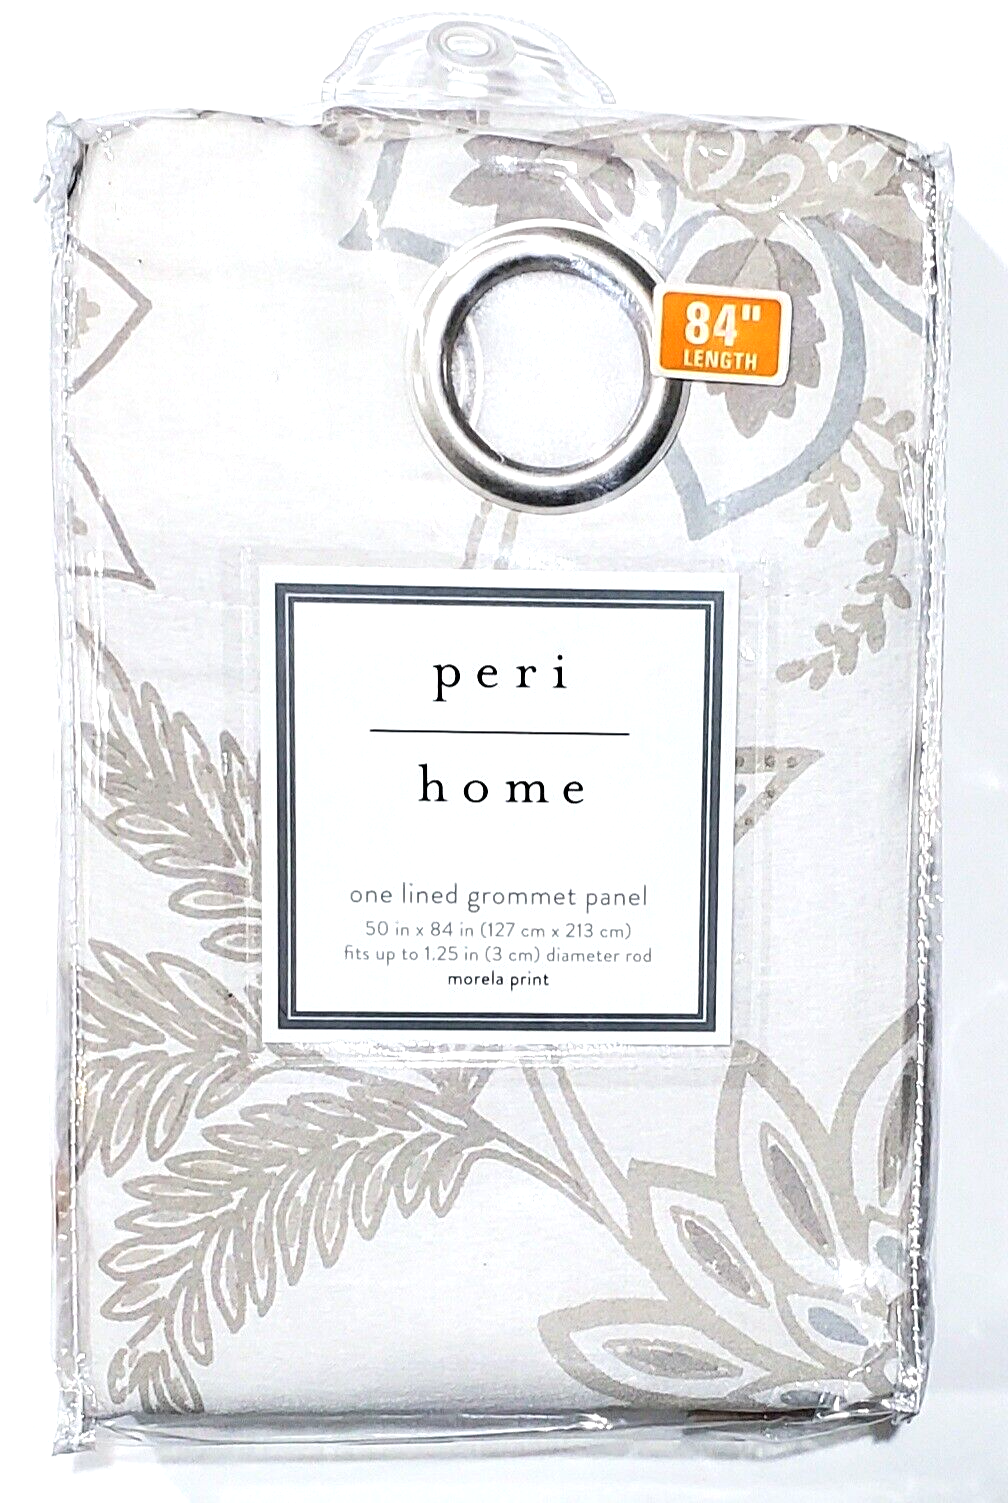 Peri Home One Lined Grommet Panel 50x84in Morela Print Cream - $35.99